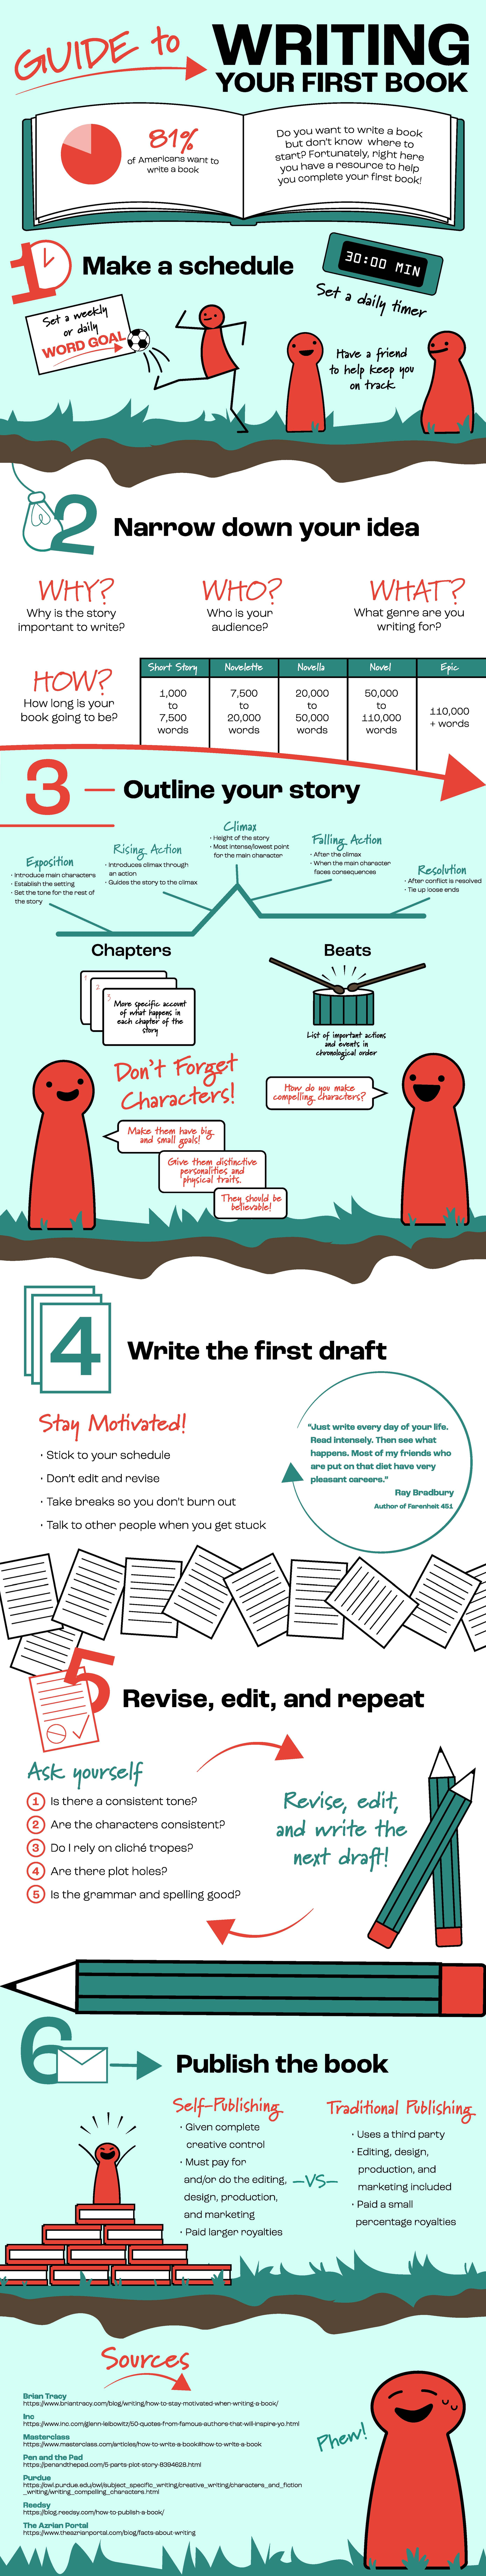 Revised fourth infographic version complete with steps 1 through 6 and altered sources